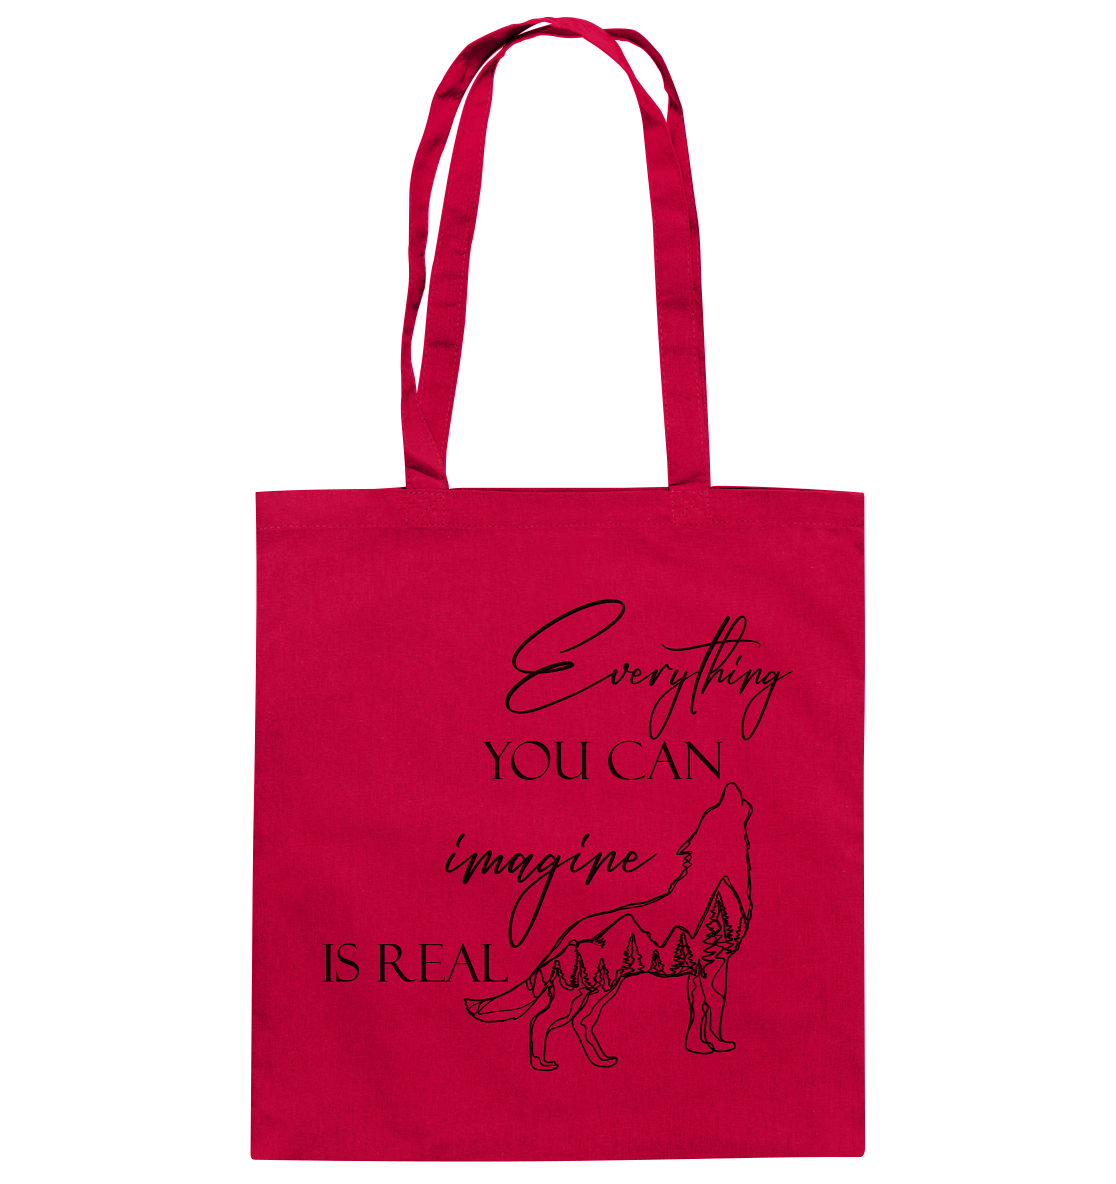 Wolf "Everything you can imagine is real" - cotton bag